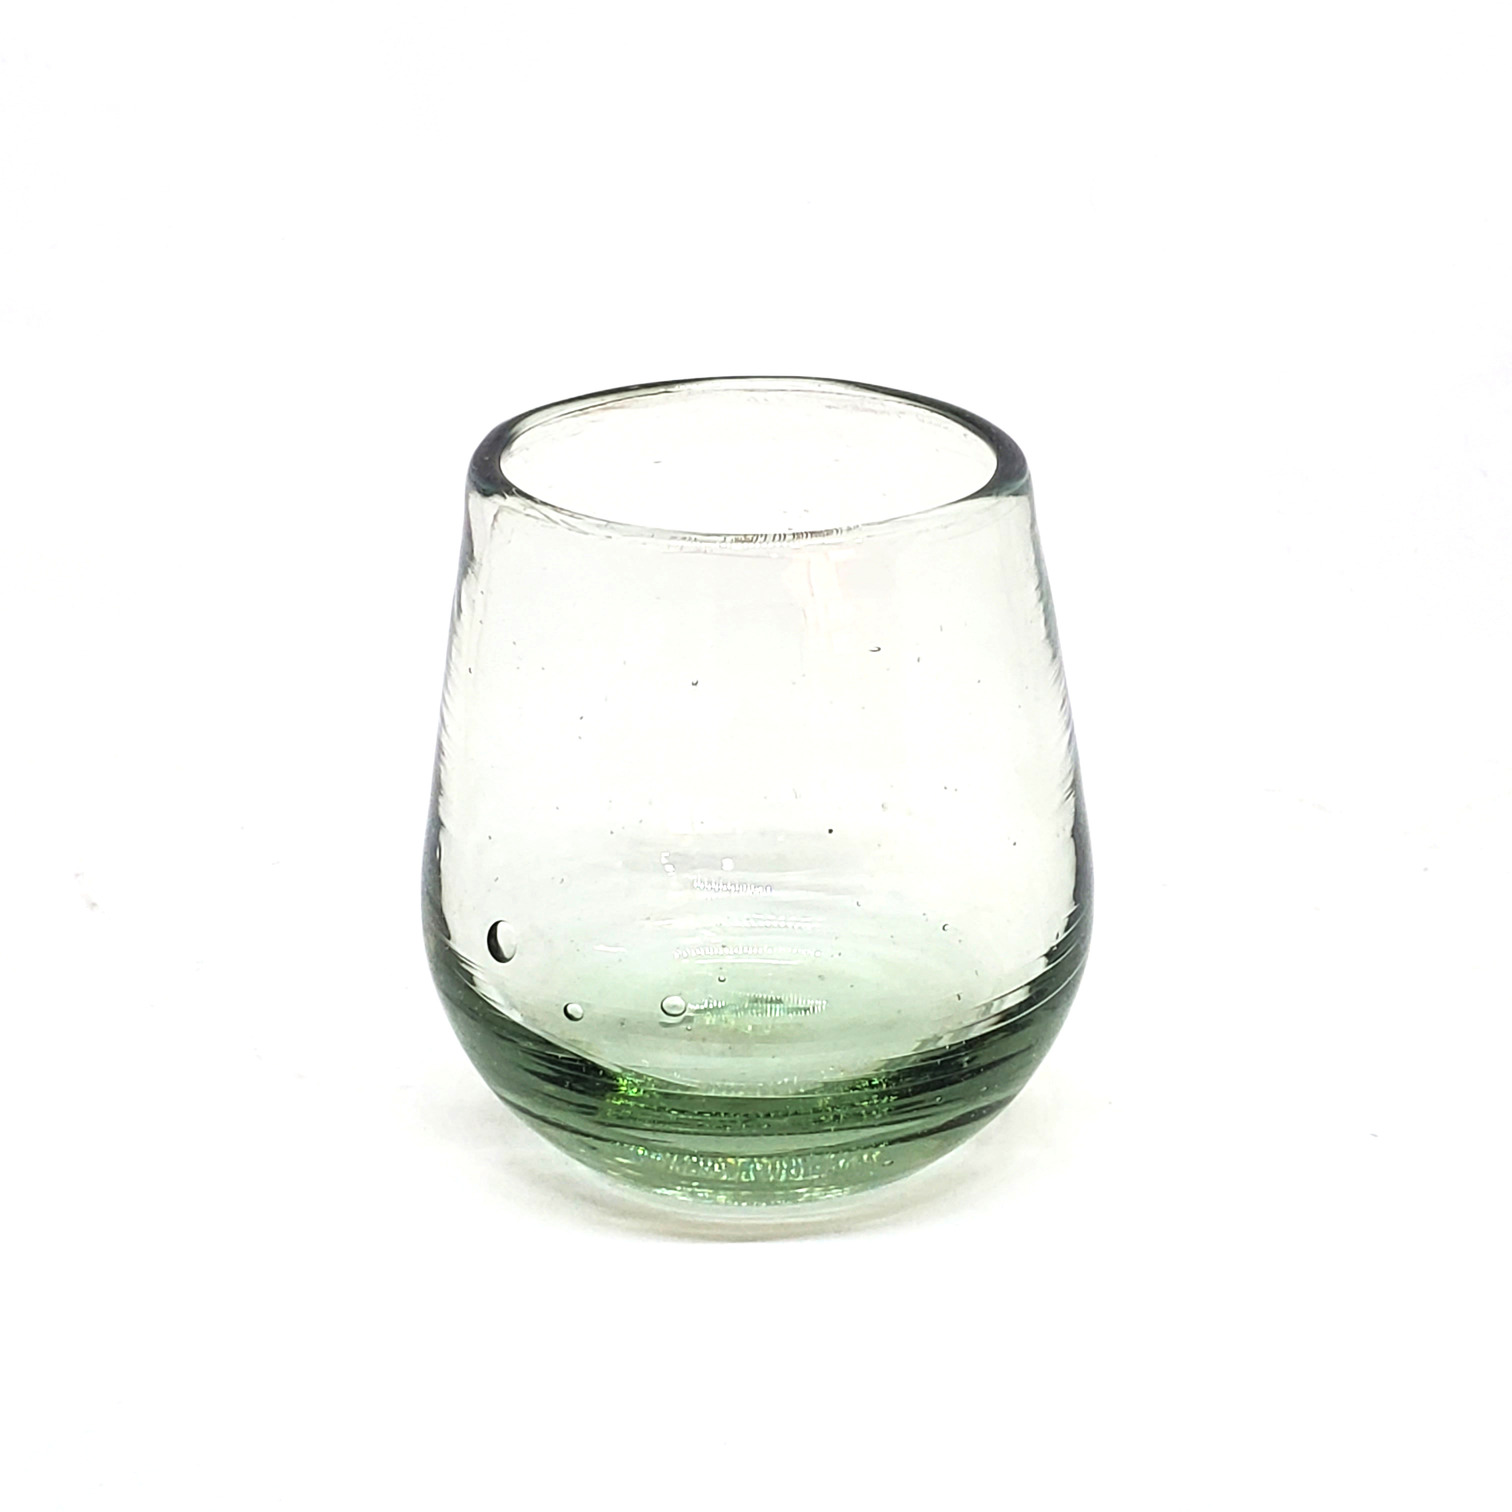 Wholesale Clear Glassware / Clear Roly Poly Glasses  / Our Clear Blown Glasses are individually handcrafted from recycled glass, making each of them unique works of art.